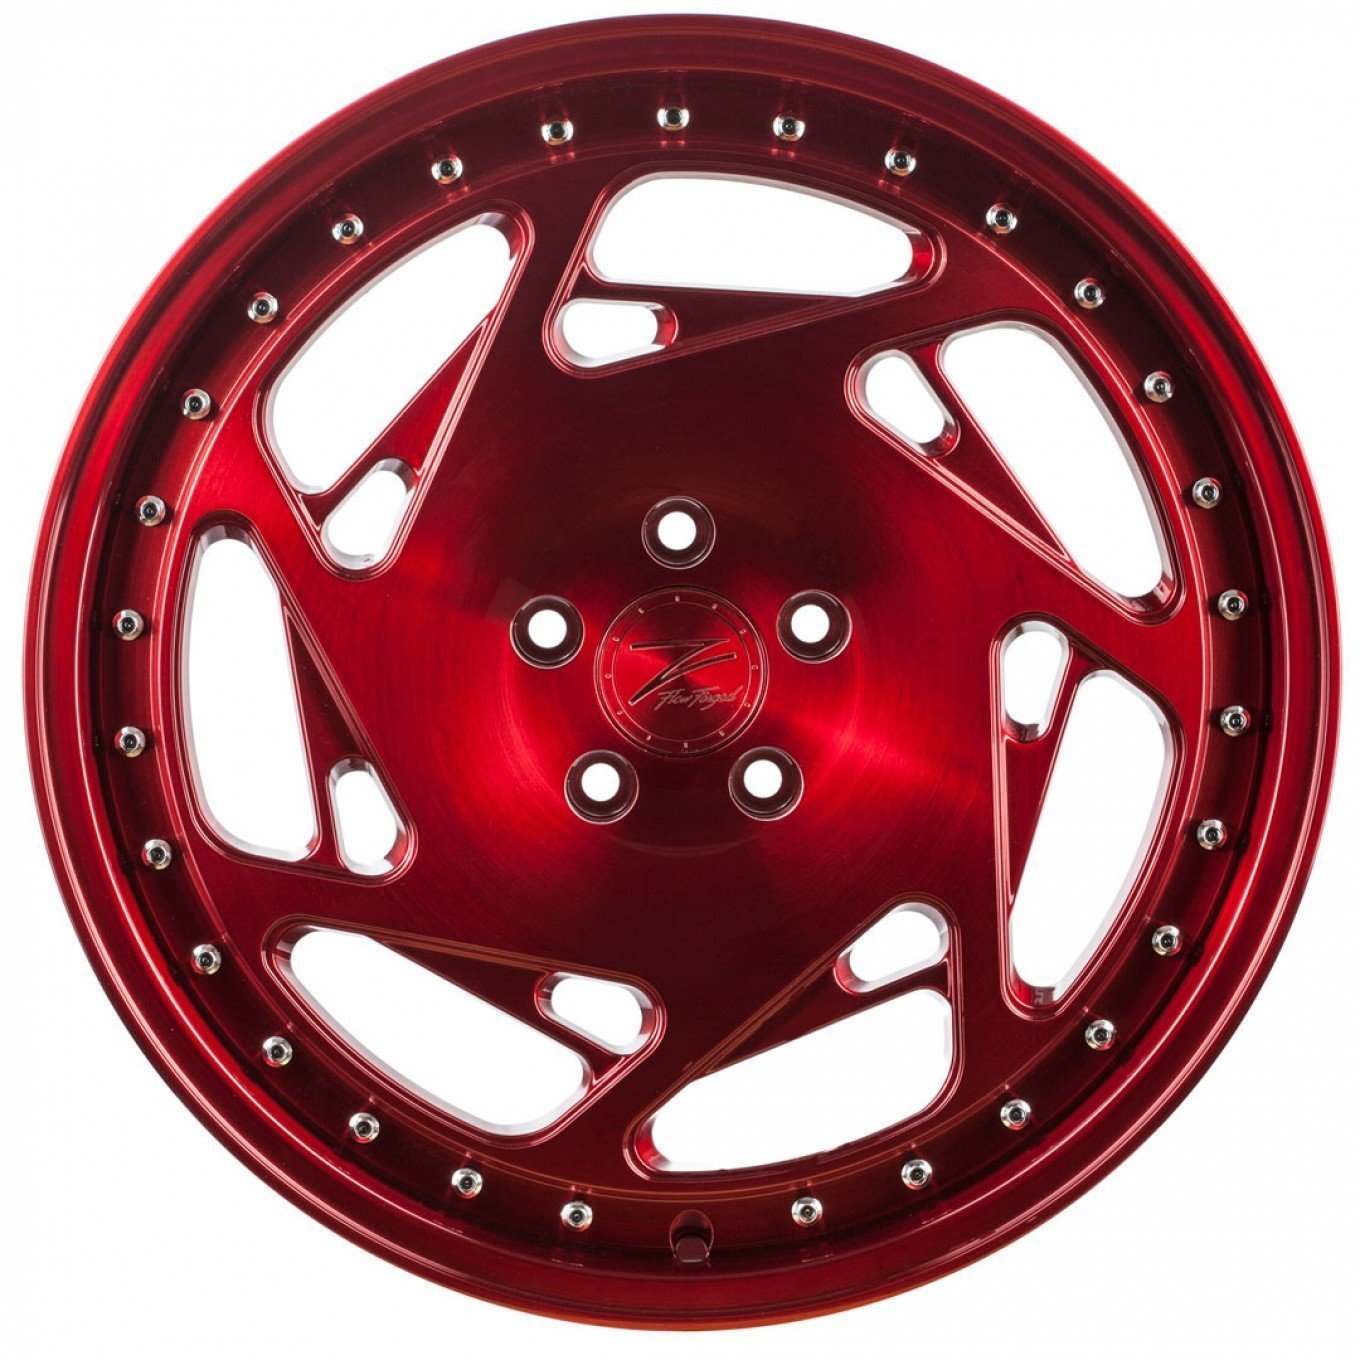 ZP5.1 8,5x19 Et45 5112 66,6 Flowforged Brushed Candy Red ZP518519455112666CR